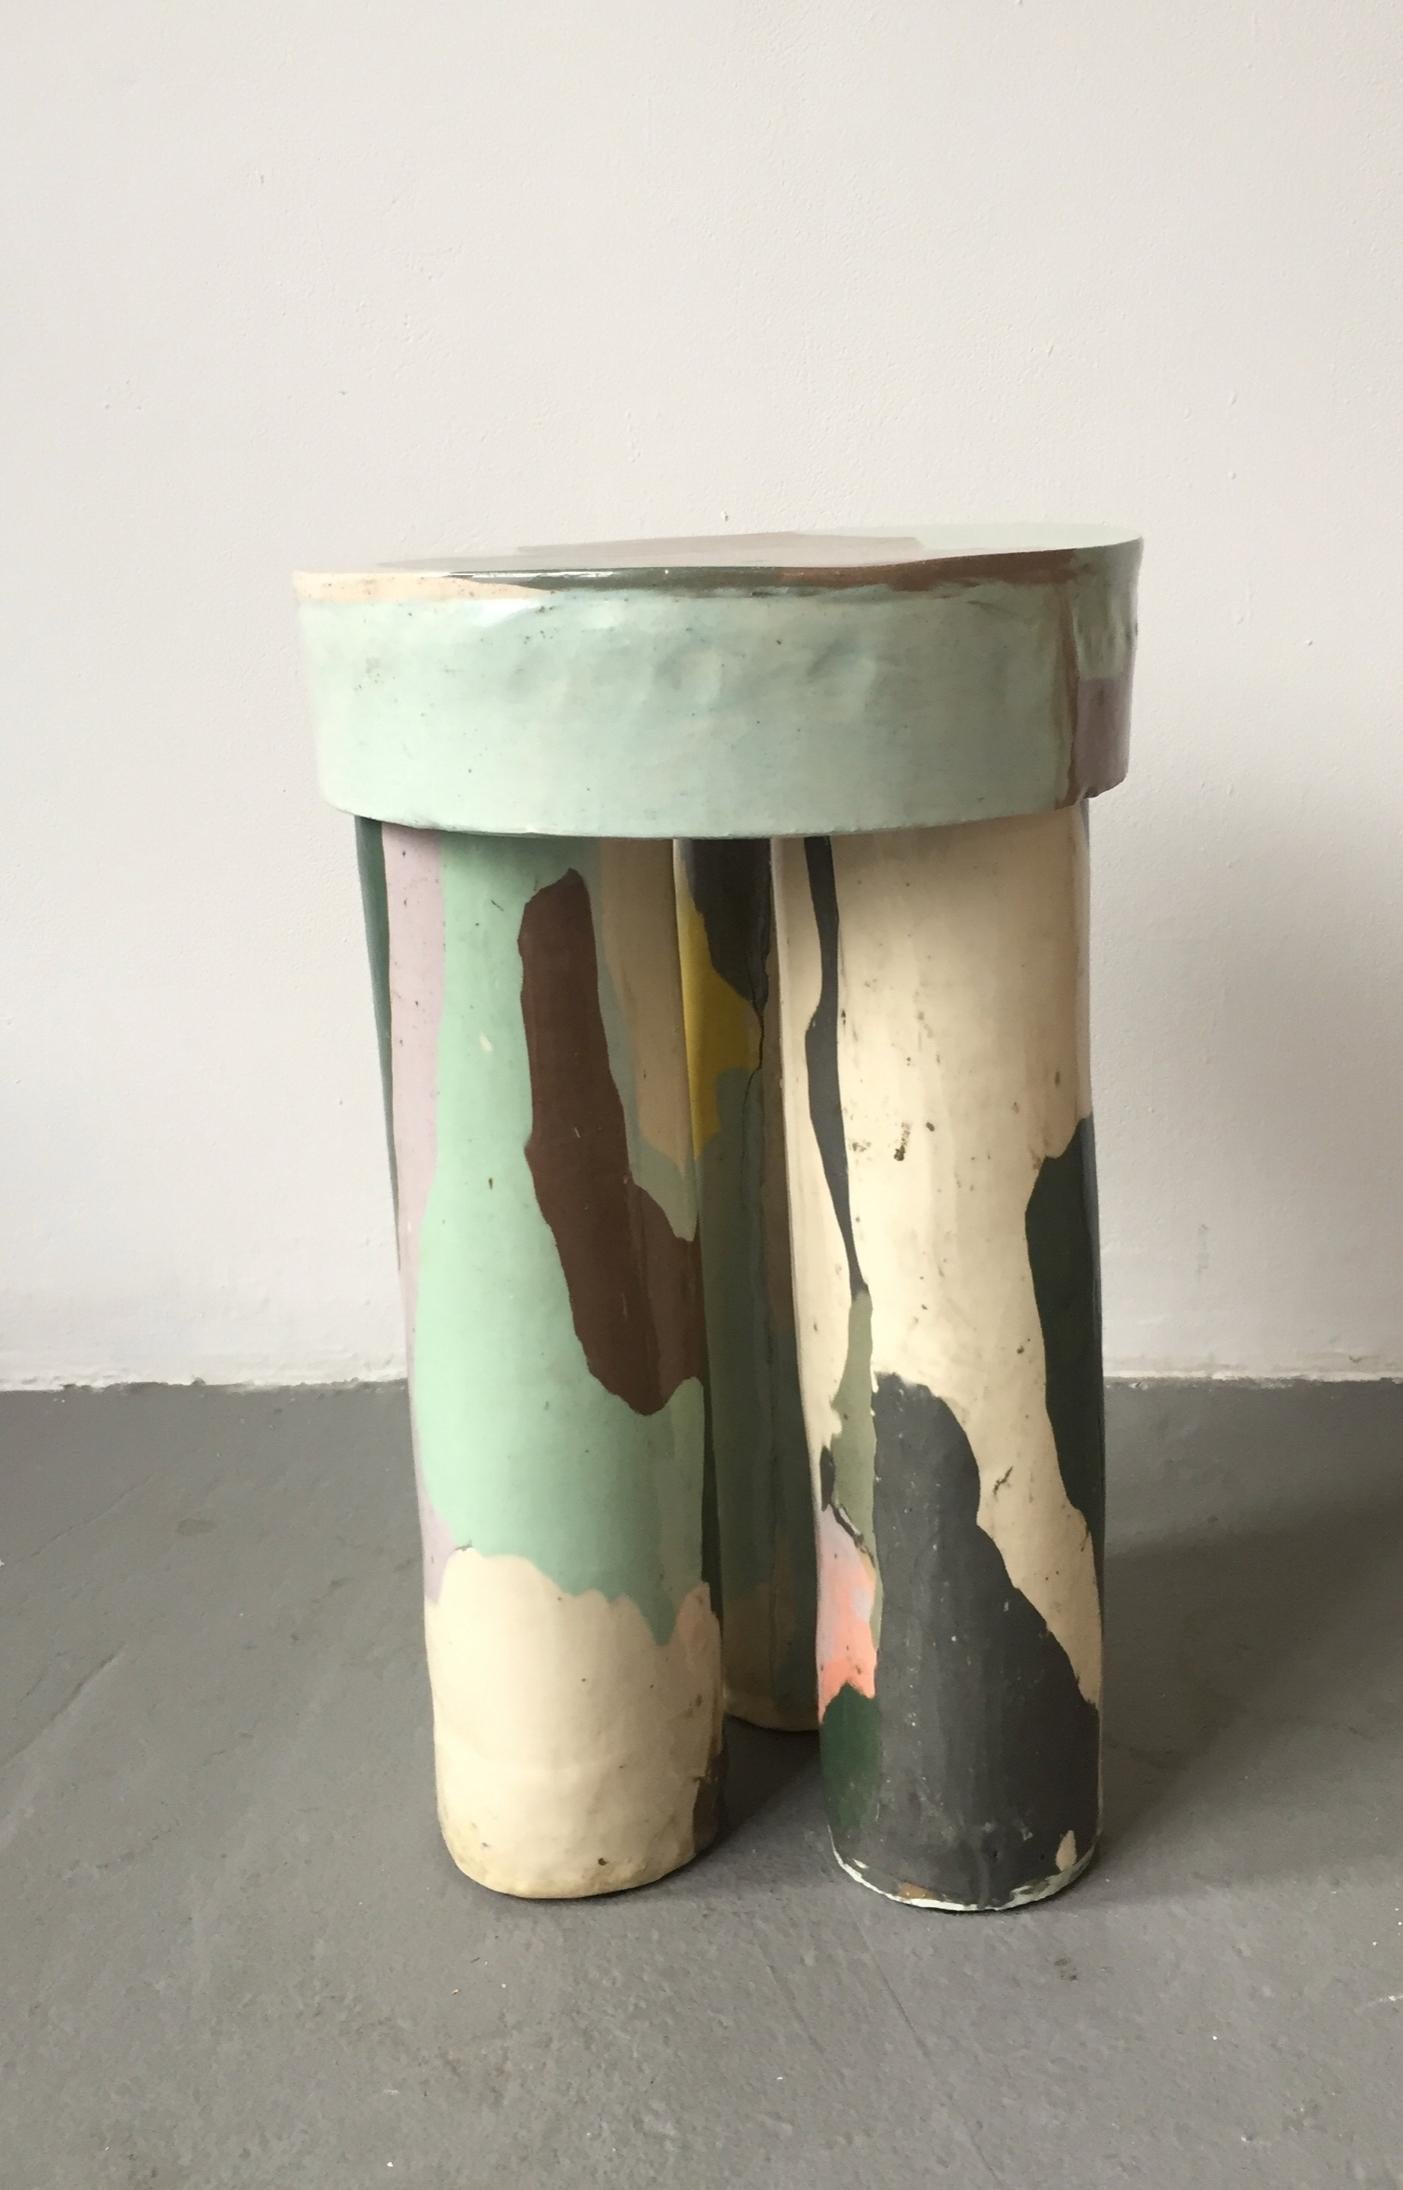 American Stool in Hand-Built Glazed Ceramic by Katie Stout, 2018